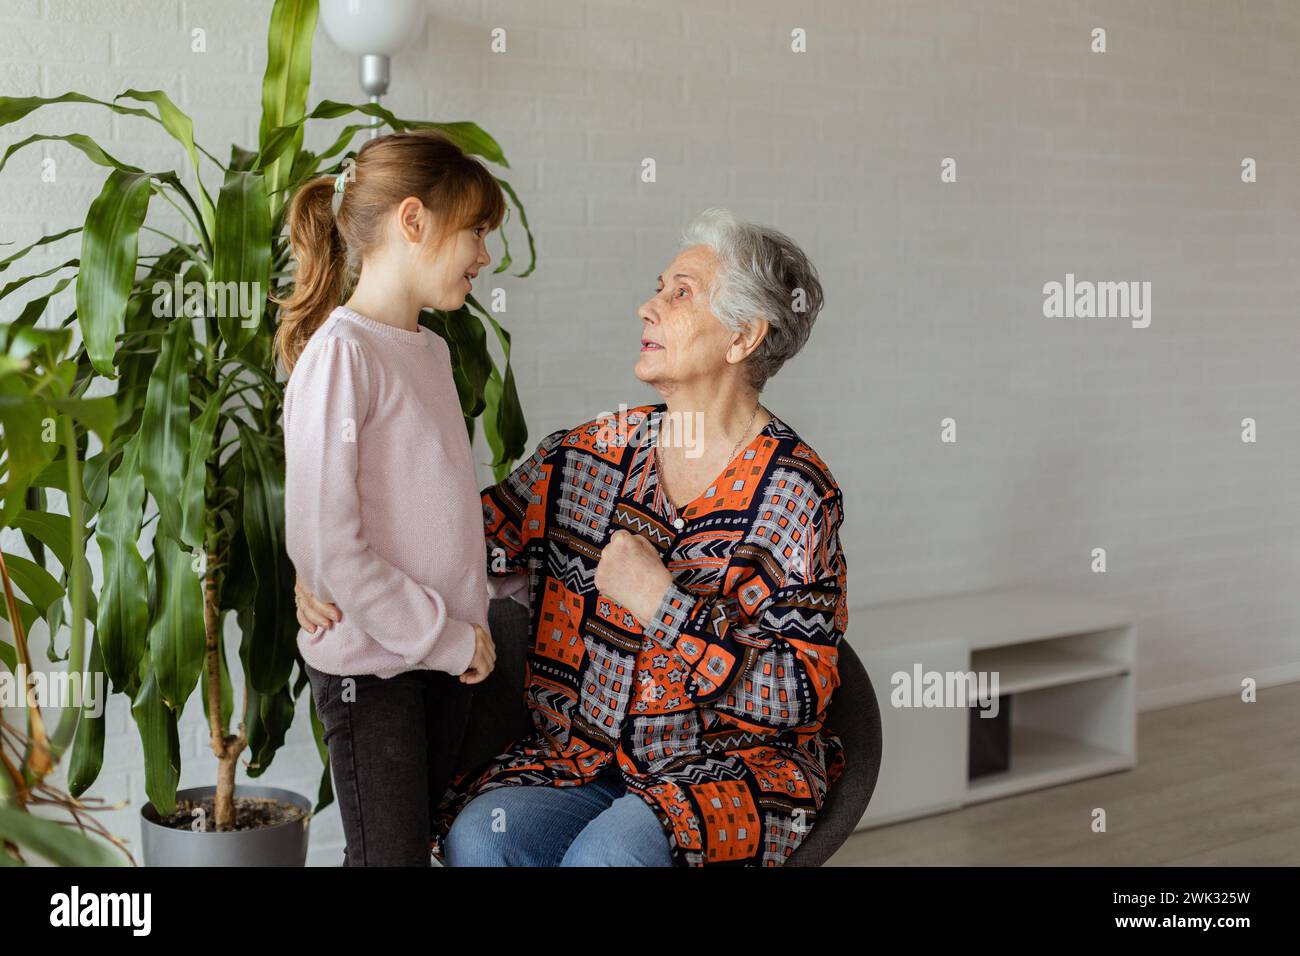 In a softly-lit room, a young girl stands beside a potted plant, sharing a moment of connection and conversation with her elderly grandmother, the joy Stock Photo